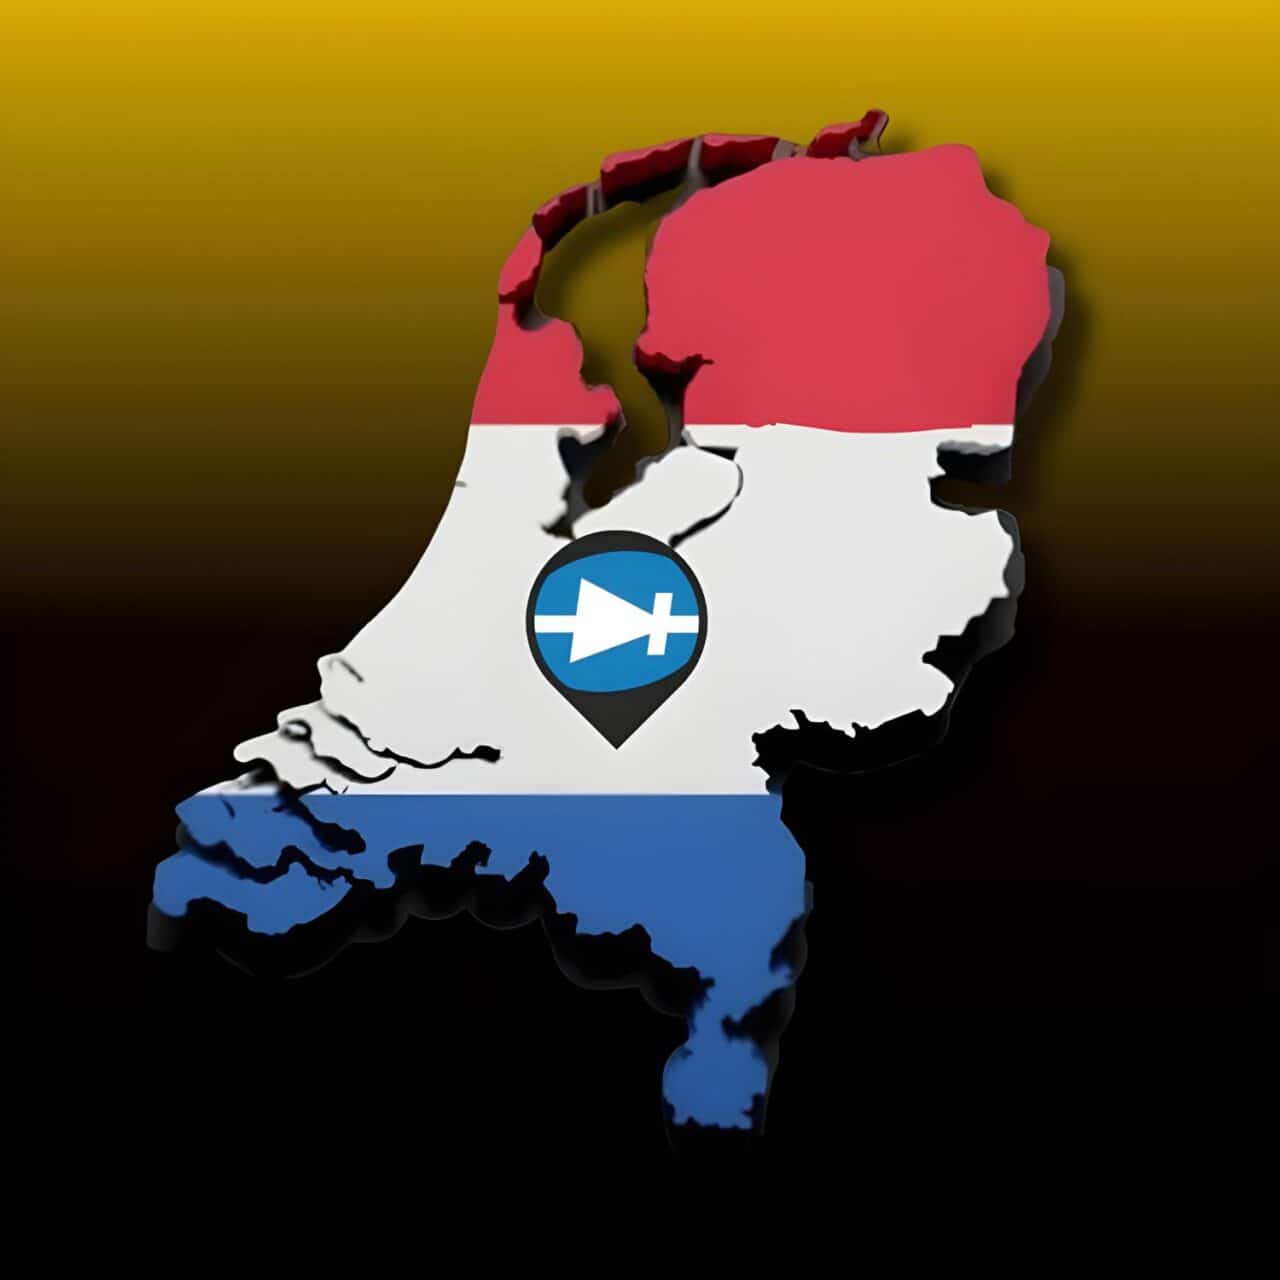 a map of Netherlands on a yellow & black background with a Itom logo presenting company's geo location